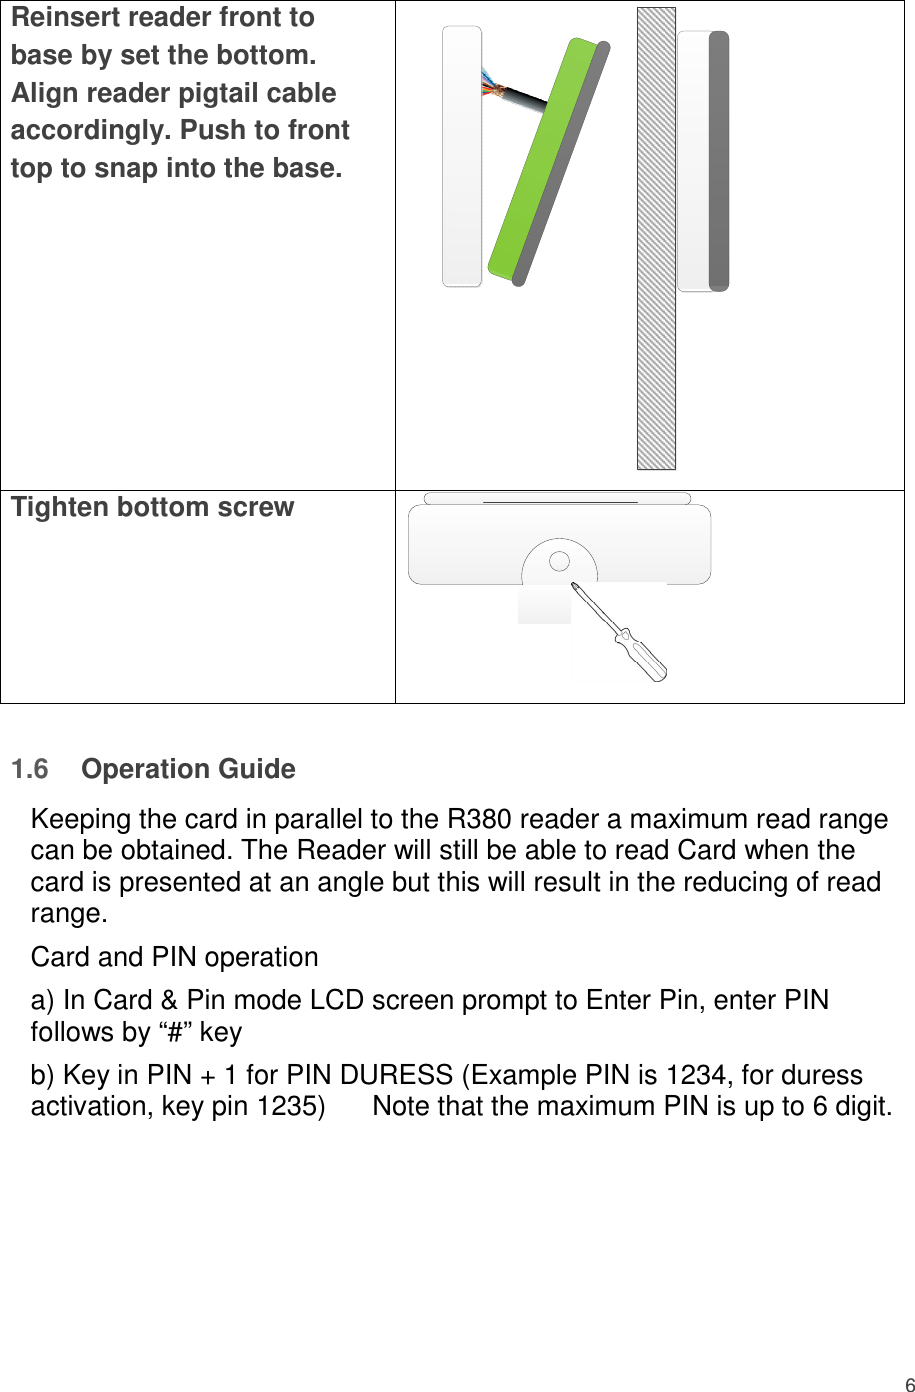 6  Reinsert reader front to base by set the bottom. Align reader pigtail cable accordingly. Push to front top to snap into the base.  Tighten bottom screw     1.6  Operation Guide  Keeping the card in parallel to the R380 reader a maximum read range can be obtained. The Reader will still be able to read Card when the card is presented at an angle but this will result in the reducing of read range.  Card and PIN operation  a) In Card &amp; Pin mode LCD screen prompt to Enter Pin, enter PIN follows by “#” key  b) Key in PIN + 1 for PIN DURESS (Example PIN is 1234, for duress activation, key pin 1235)      Note that the maximum PIN is up to 6 digit.        